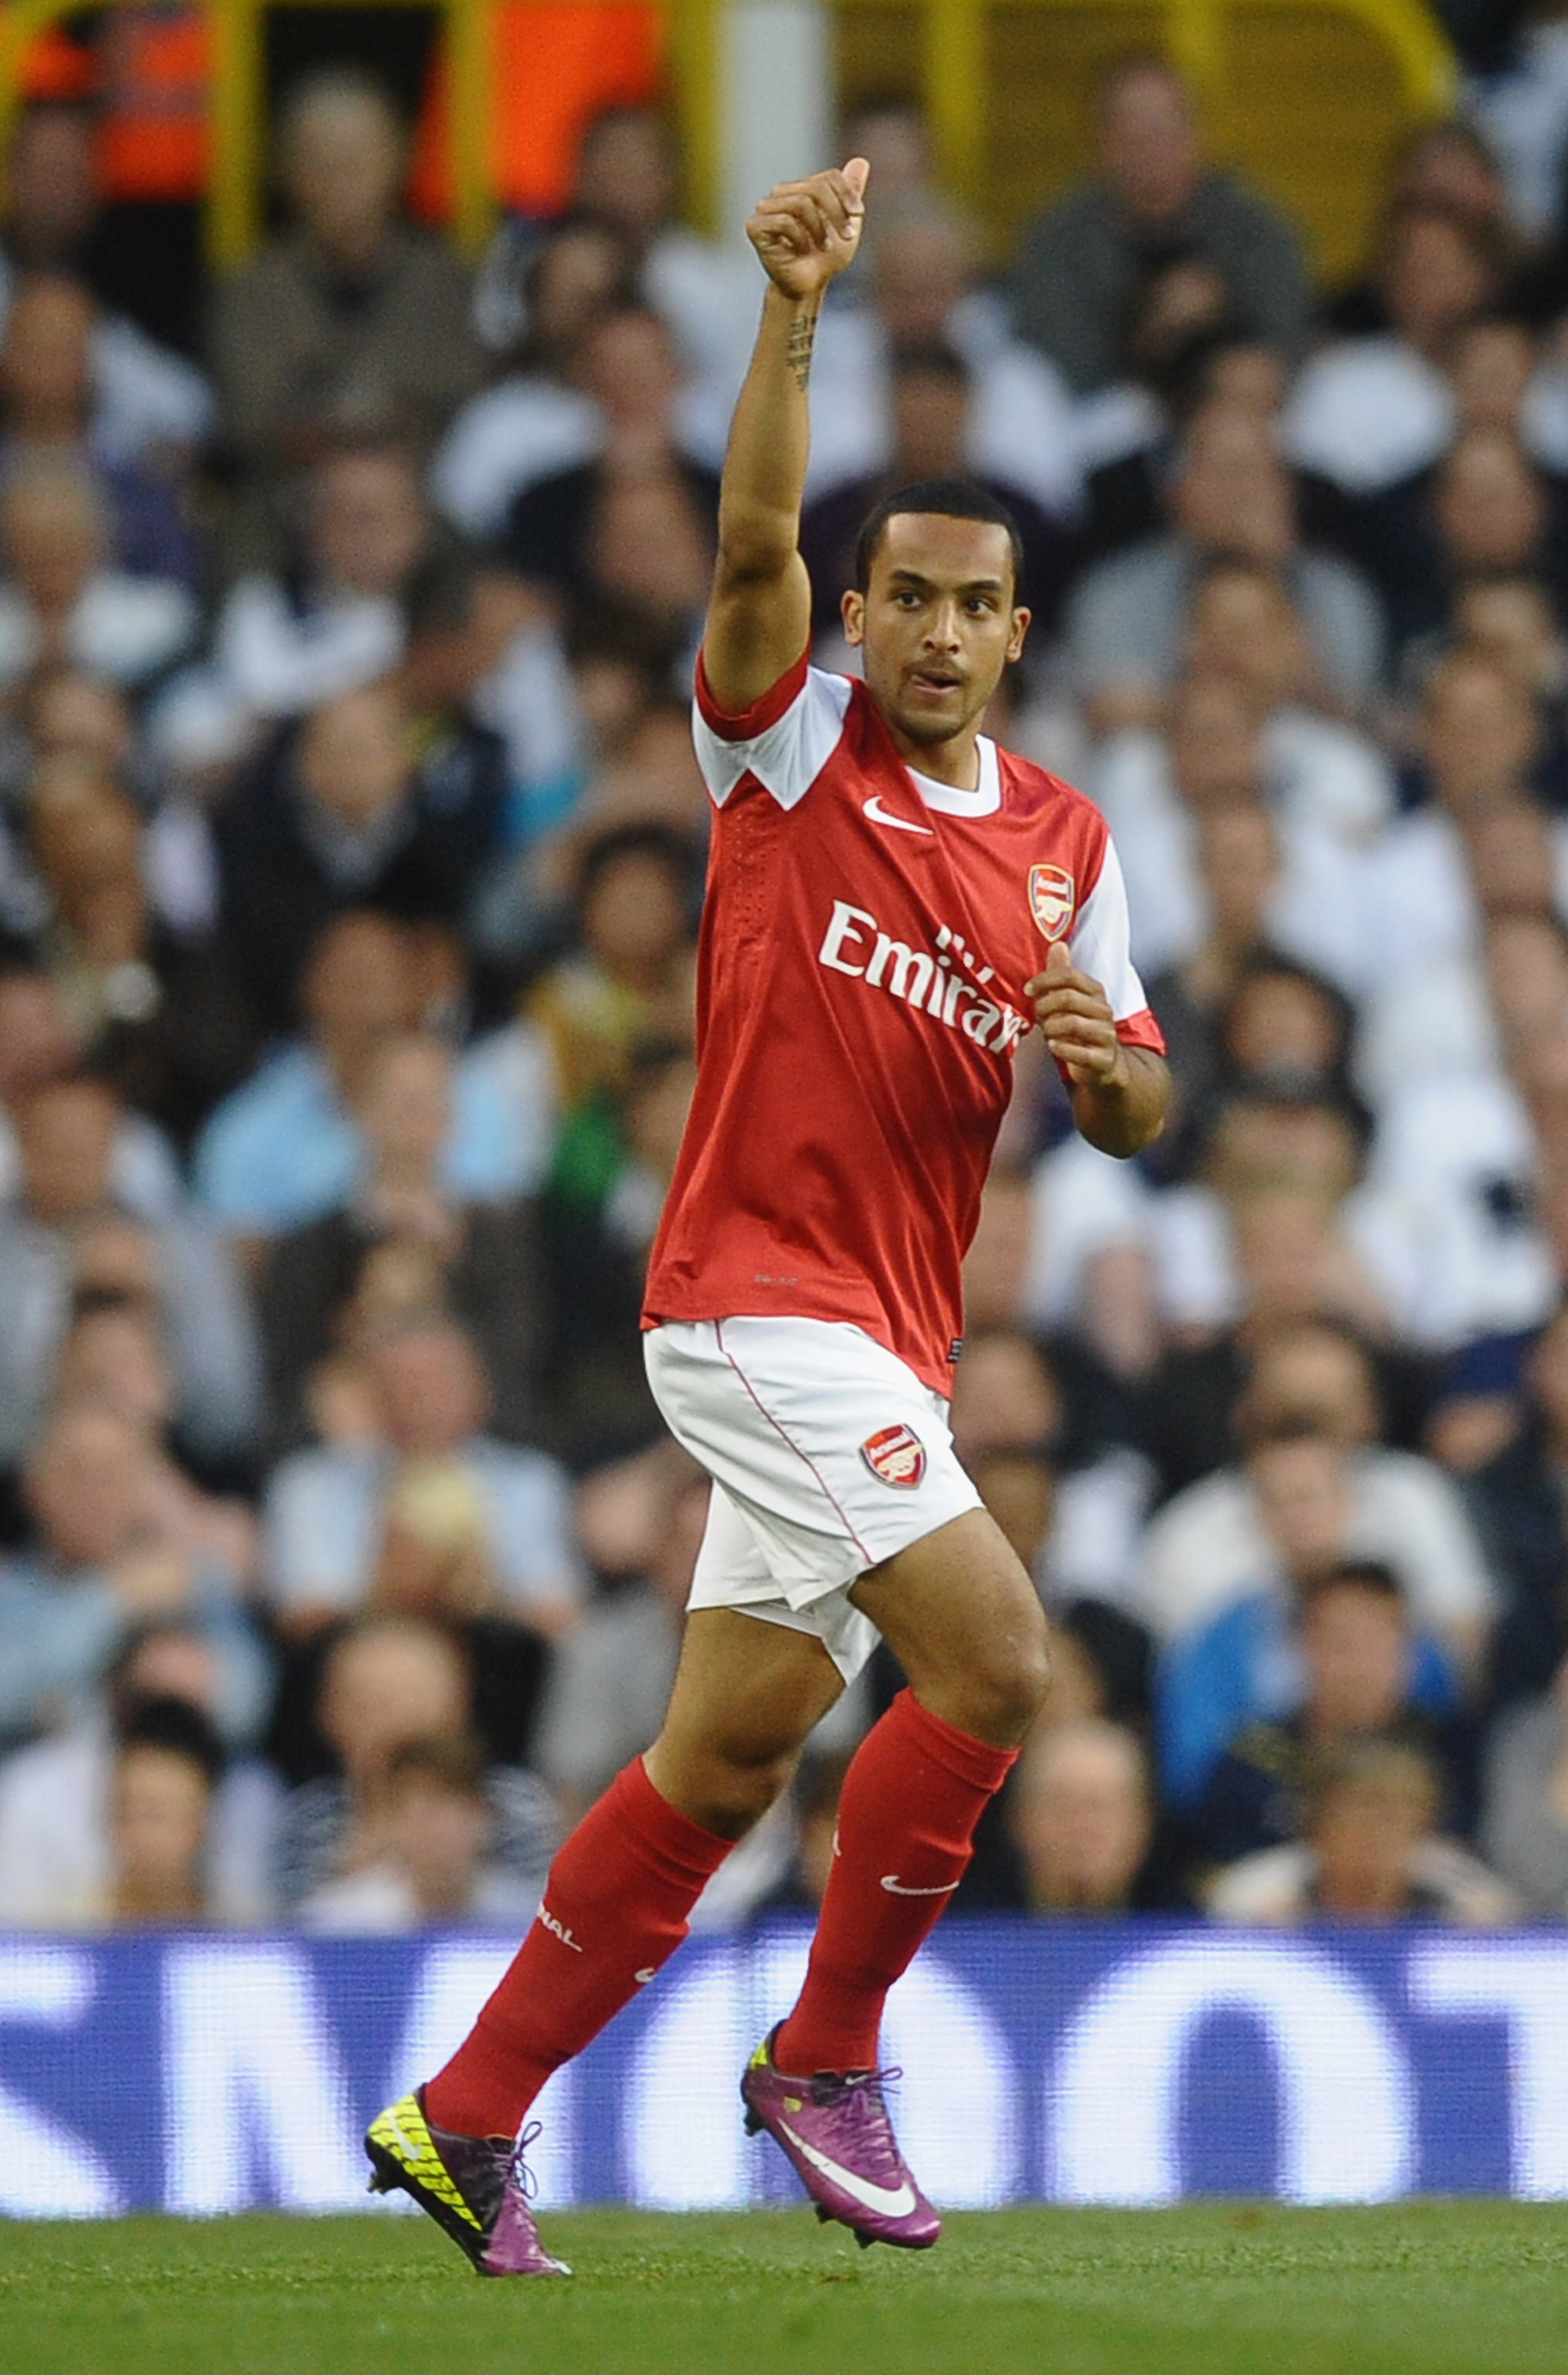 LONDON, ENGLAND - APRIL 20:  Theo Walcott of Arsenal celebrates scoring the opening goal during the Barclays Premier League match between Tottenham Hotspur and Arsenal at White Hart Lane on April 20, 2011 in London, England.  (Photo by Laurence Griffiths/